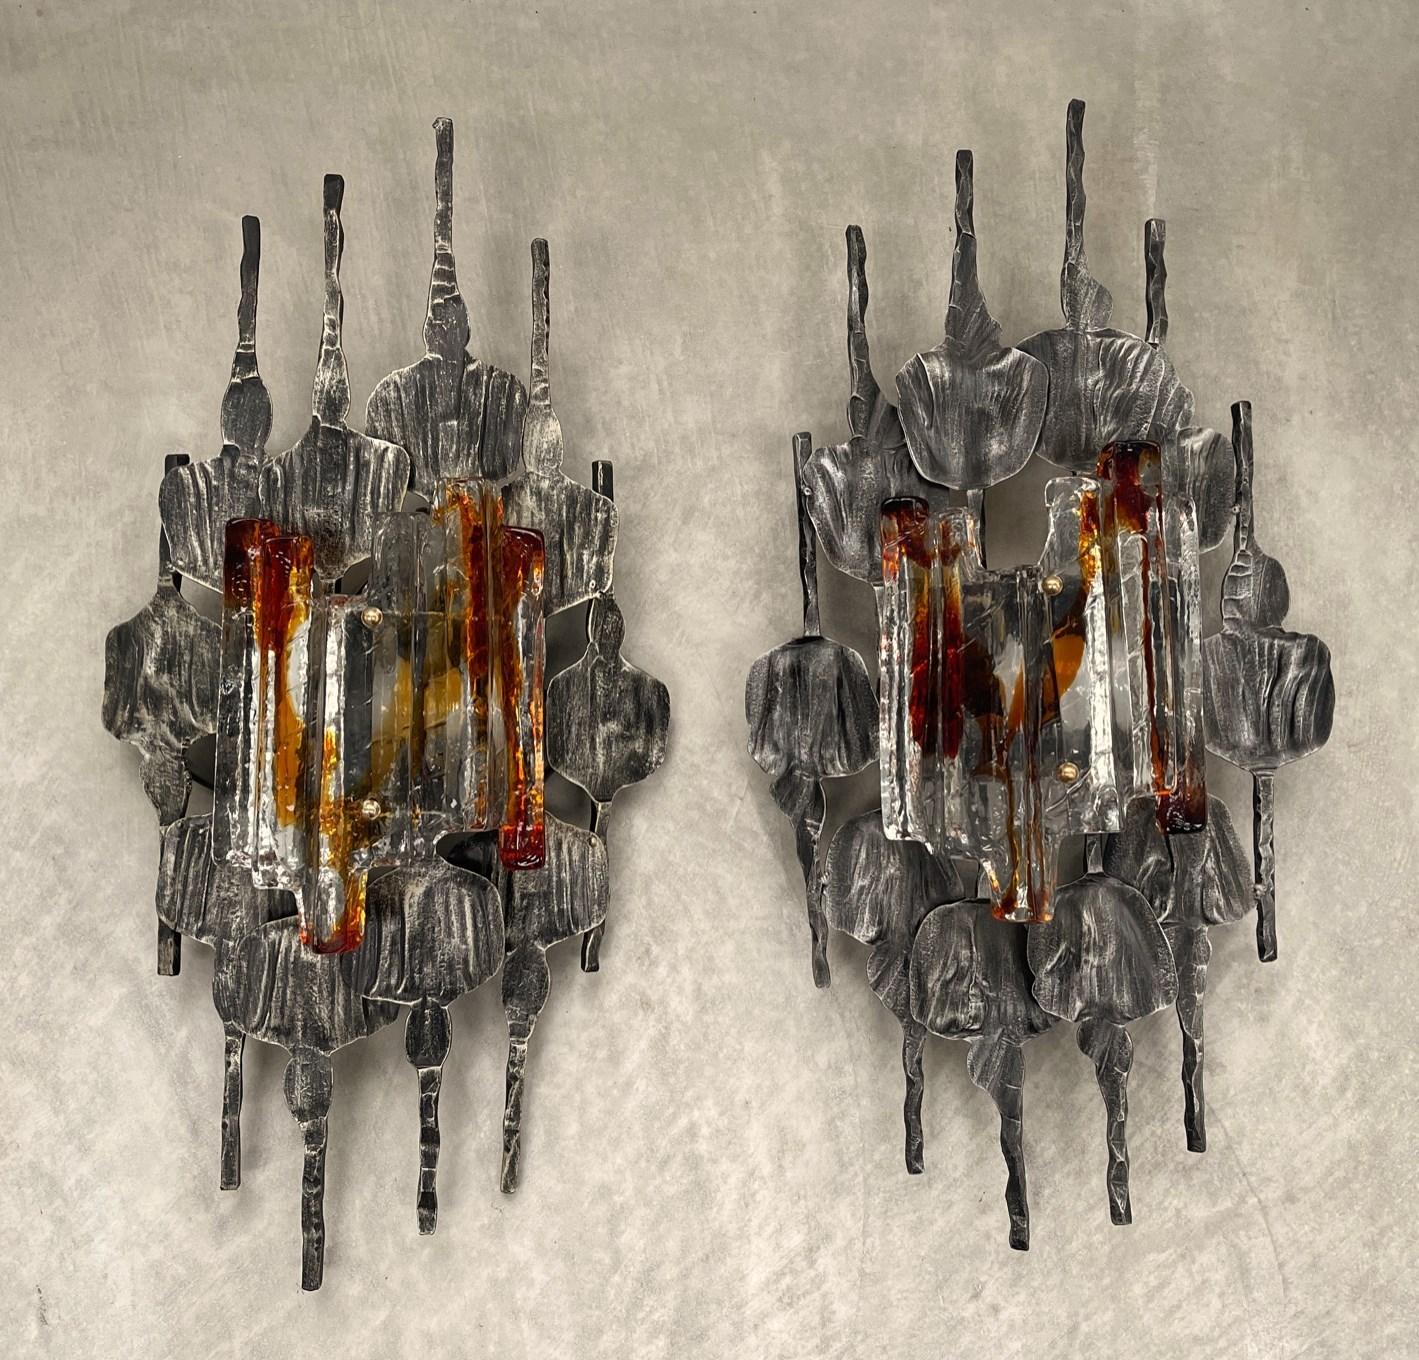 A pair of Sculptural Scandinavian Modern Glass Metal Sconces by Tom Ahlstrom Hans Ehrich 1970s - A hand-wrought iron surround holds an amber and clear Murano ice glass - gives a beautiful warm effect when lit. Stunning Swedish industrial design.